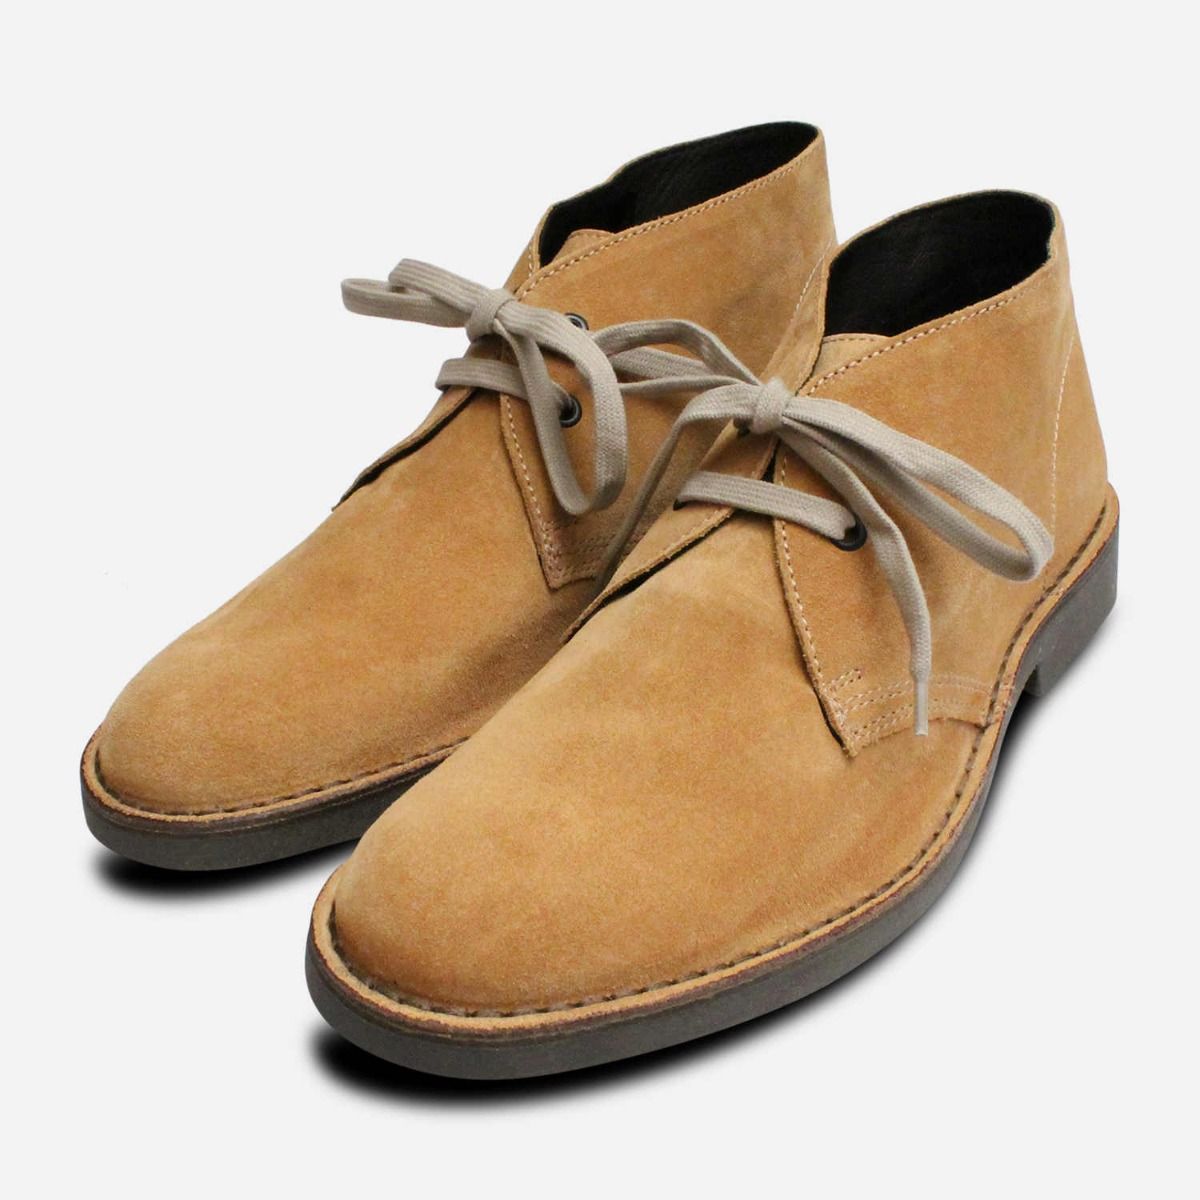 camel suede boots mens